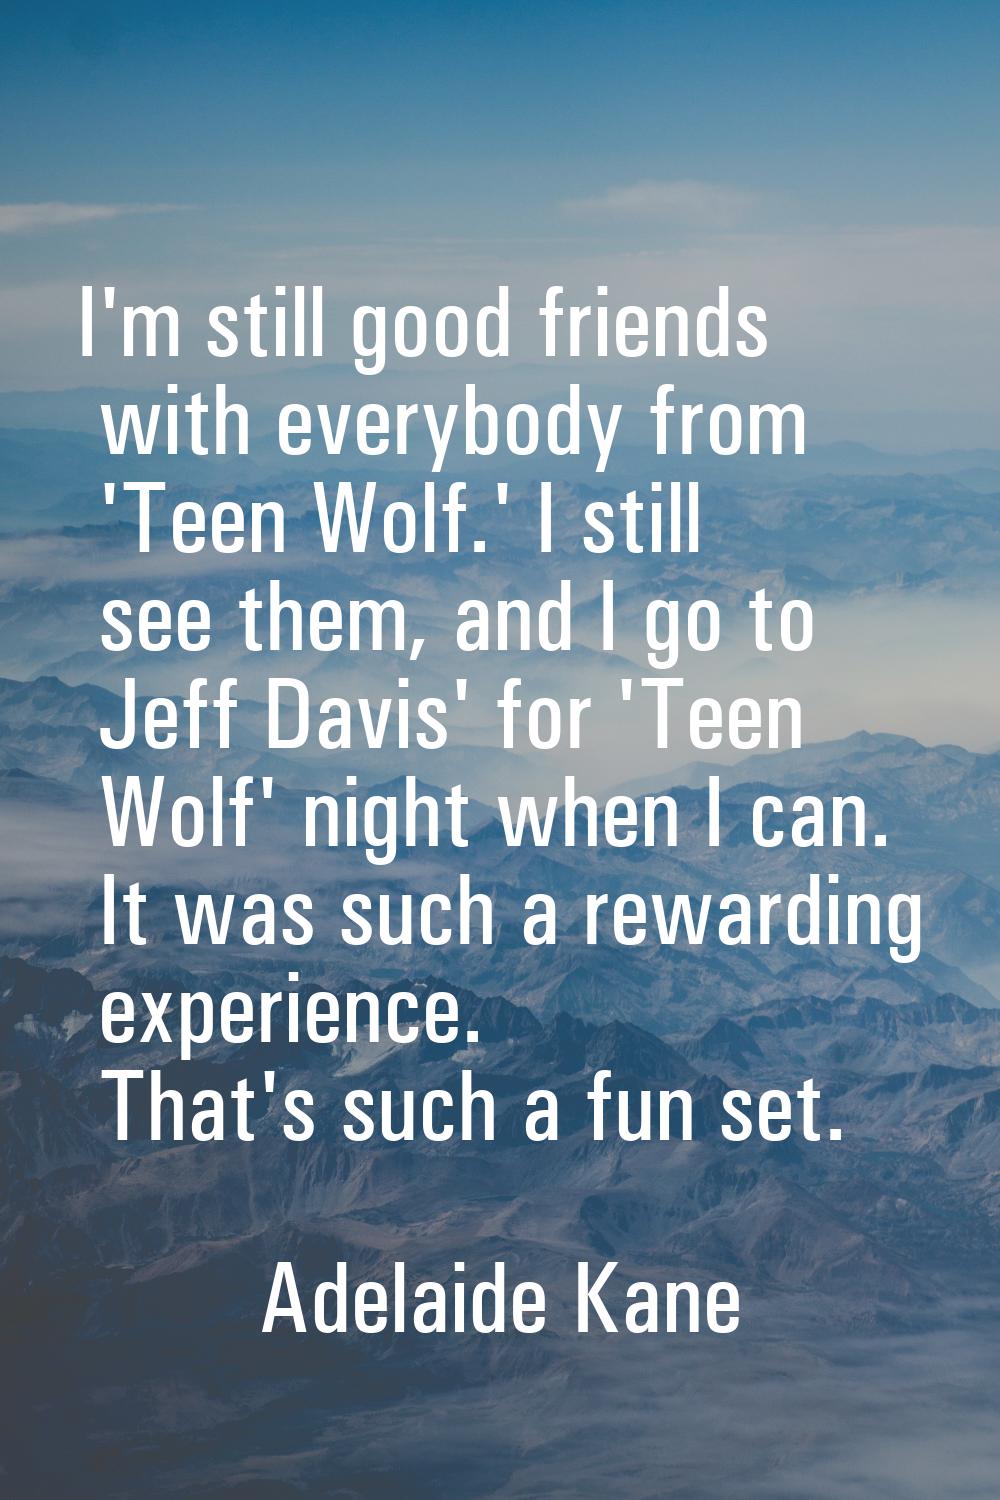 I'm still good friends with everybody from 'Teen Wolf.' I still see them, and I go to Jeff Davis' f